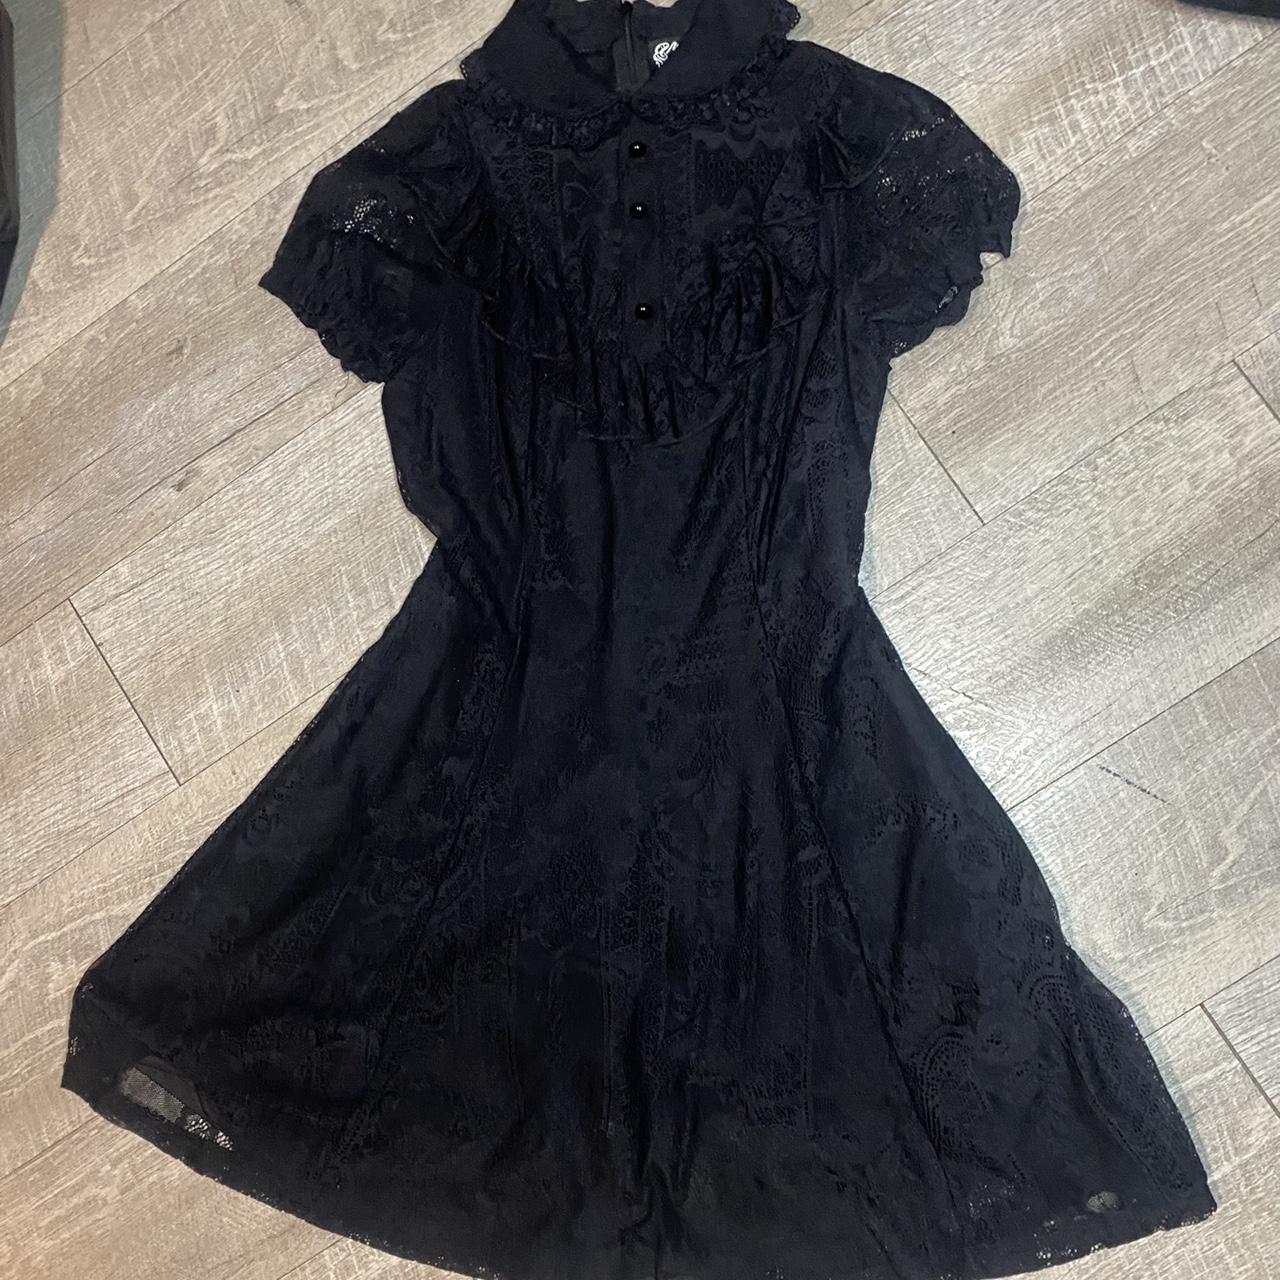 Killstar dress with collar & lace detail comes from... - Depop